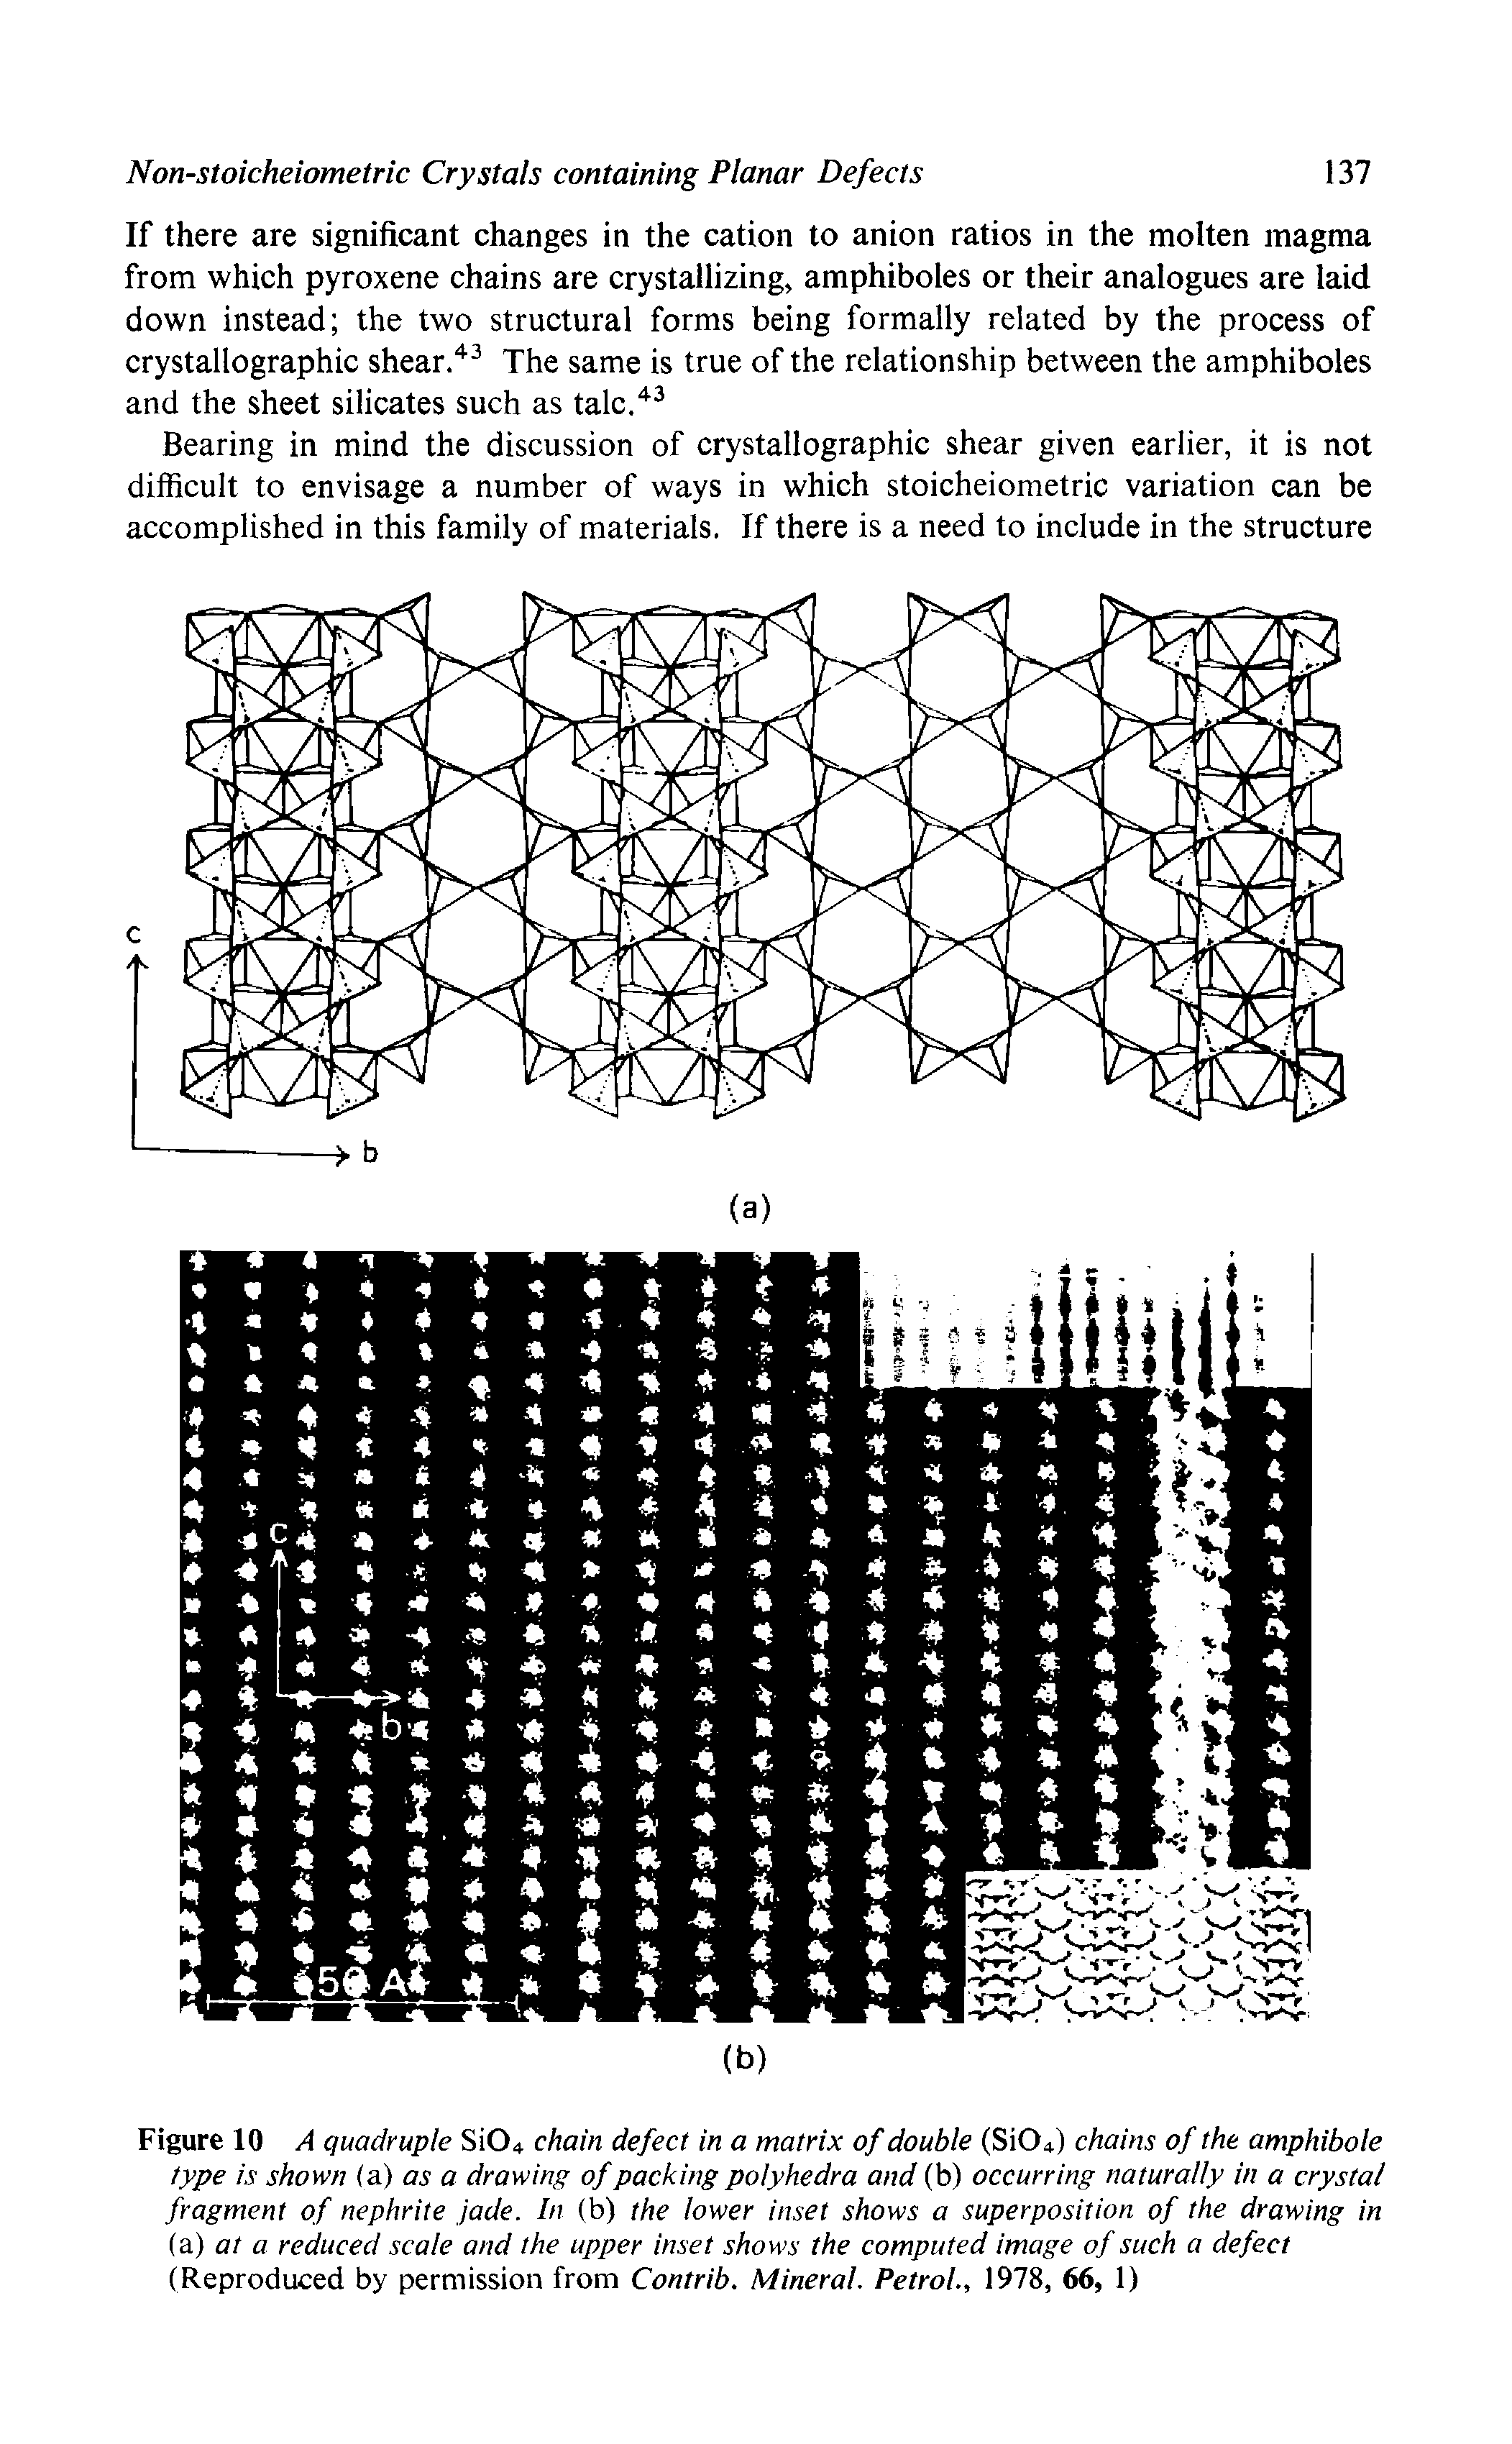 Figure 10 A quadruple SiO chain defect in a matrix of double (Si04) chains of the amphibole type is shown (a) as a drawing of packing polyhedra and (b) occurring naturally in a crystal fragment of nephrite jade. In (b) the lower inset shows a superposition of the drawing in (a) at a reduced scale and the upper inset shows the computed image of such a defect (Reproduced by permission from Contrib. Mineral. Petrol., 1978, 66, 1)...